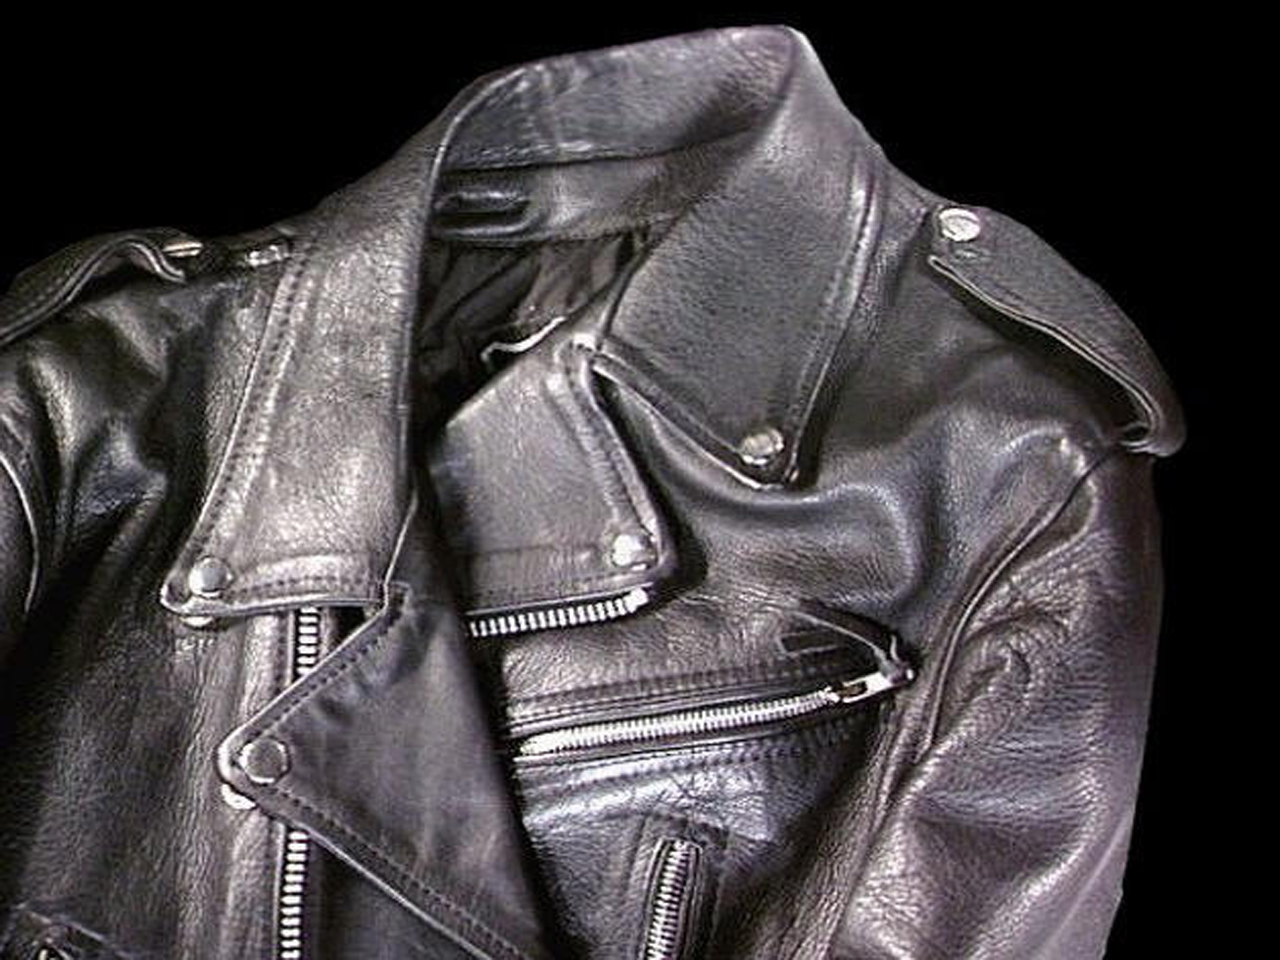 Black leather jacket: Iconic cool fashion - Photo 1 - Pictures - CBS News